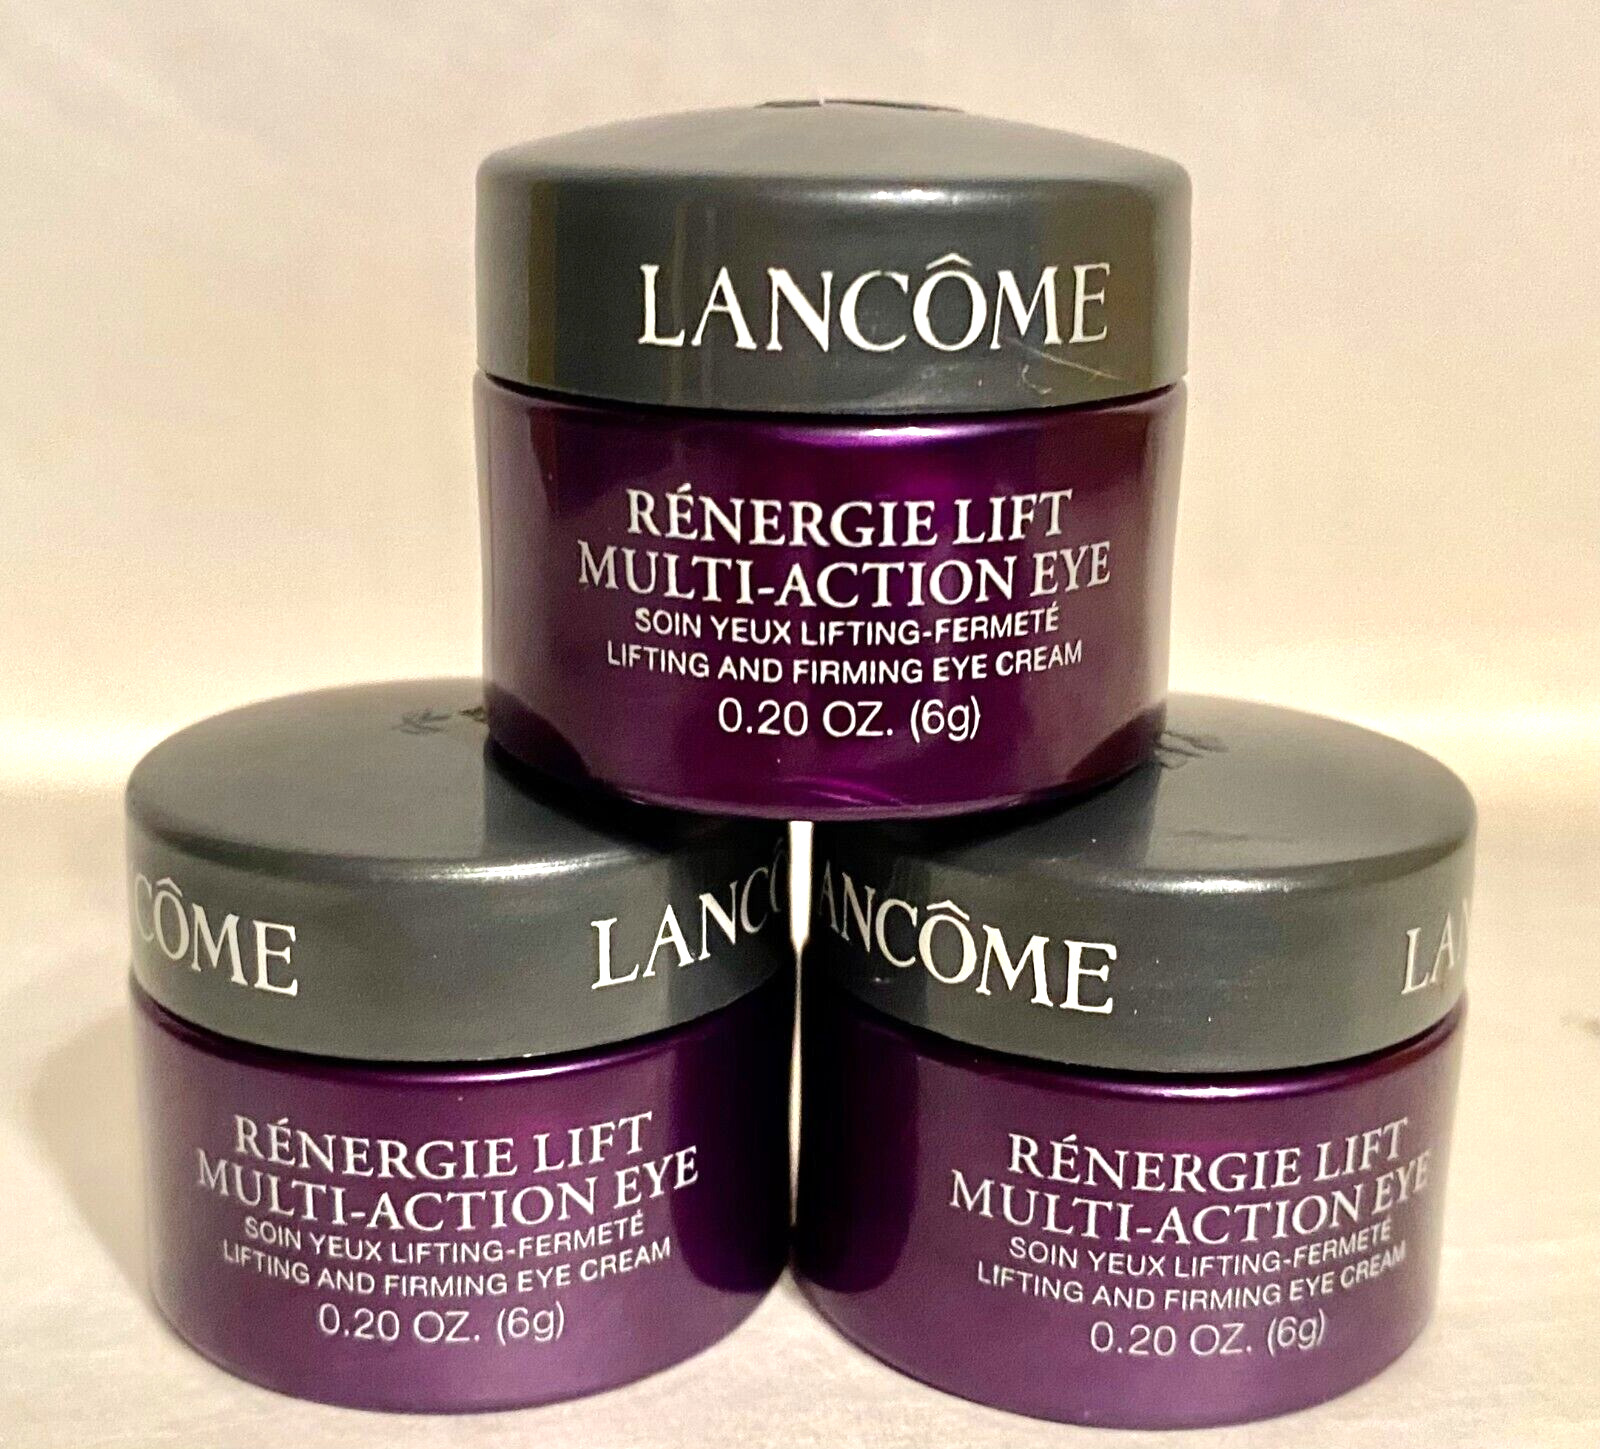 3 Lancome Renergie Lift Multi-Action Lifting & Firming Eye Cream  New Lot of 3